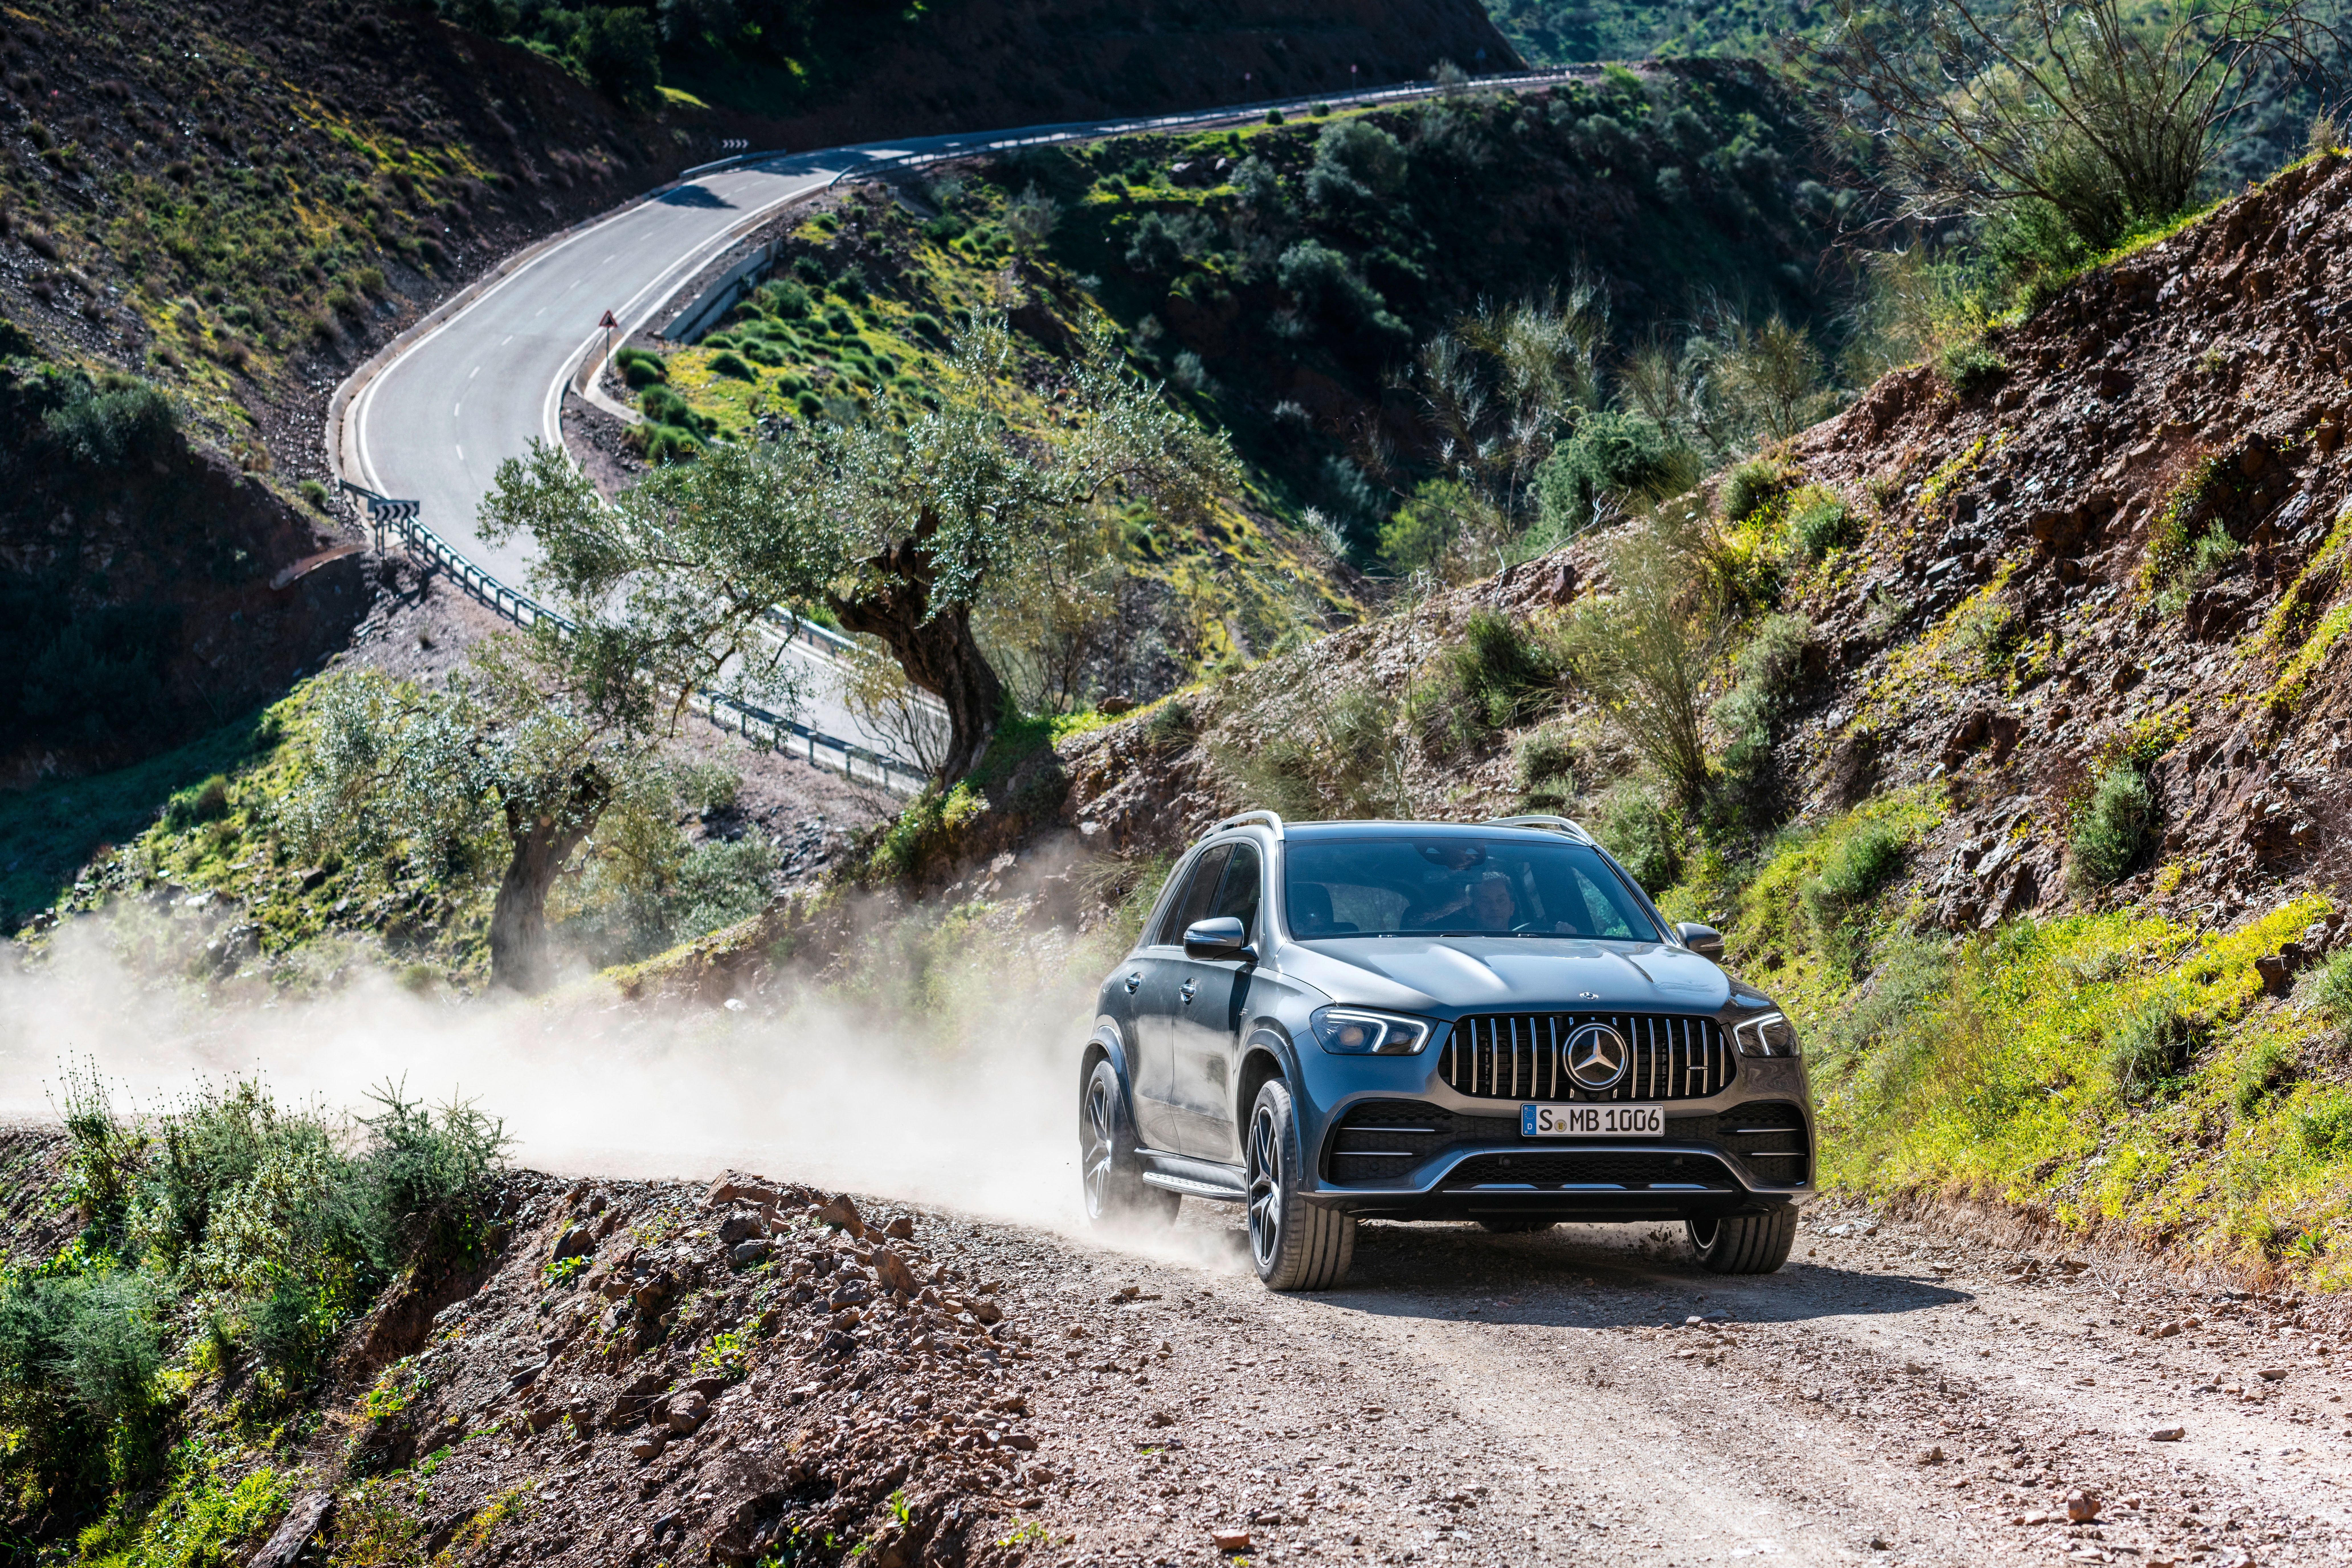 Vehicles Mercedes-AMG GLE 53 HD Wallpaper | Background Image